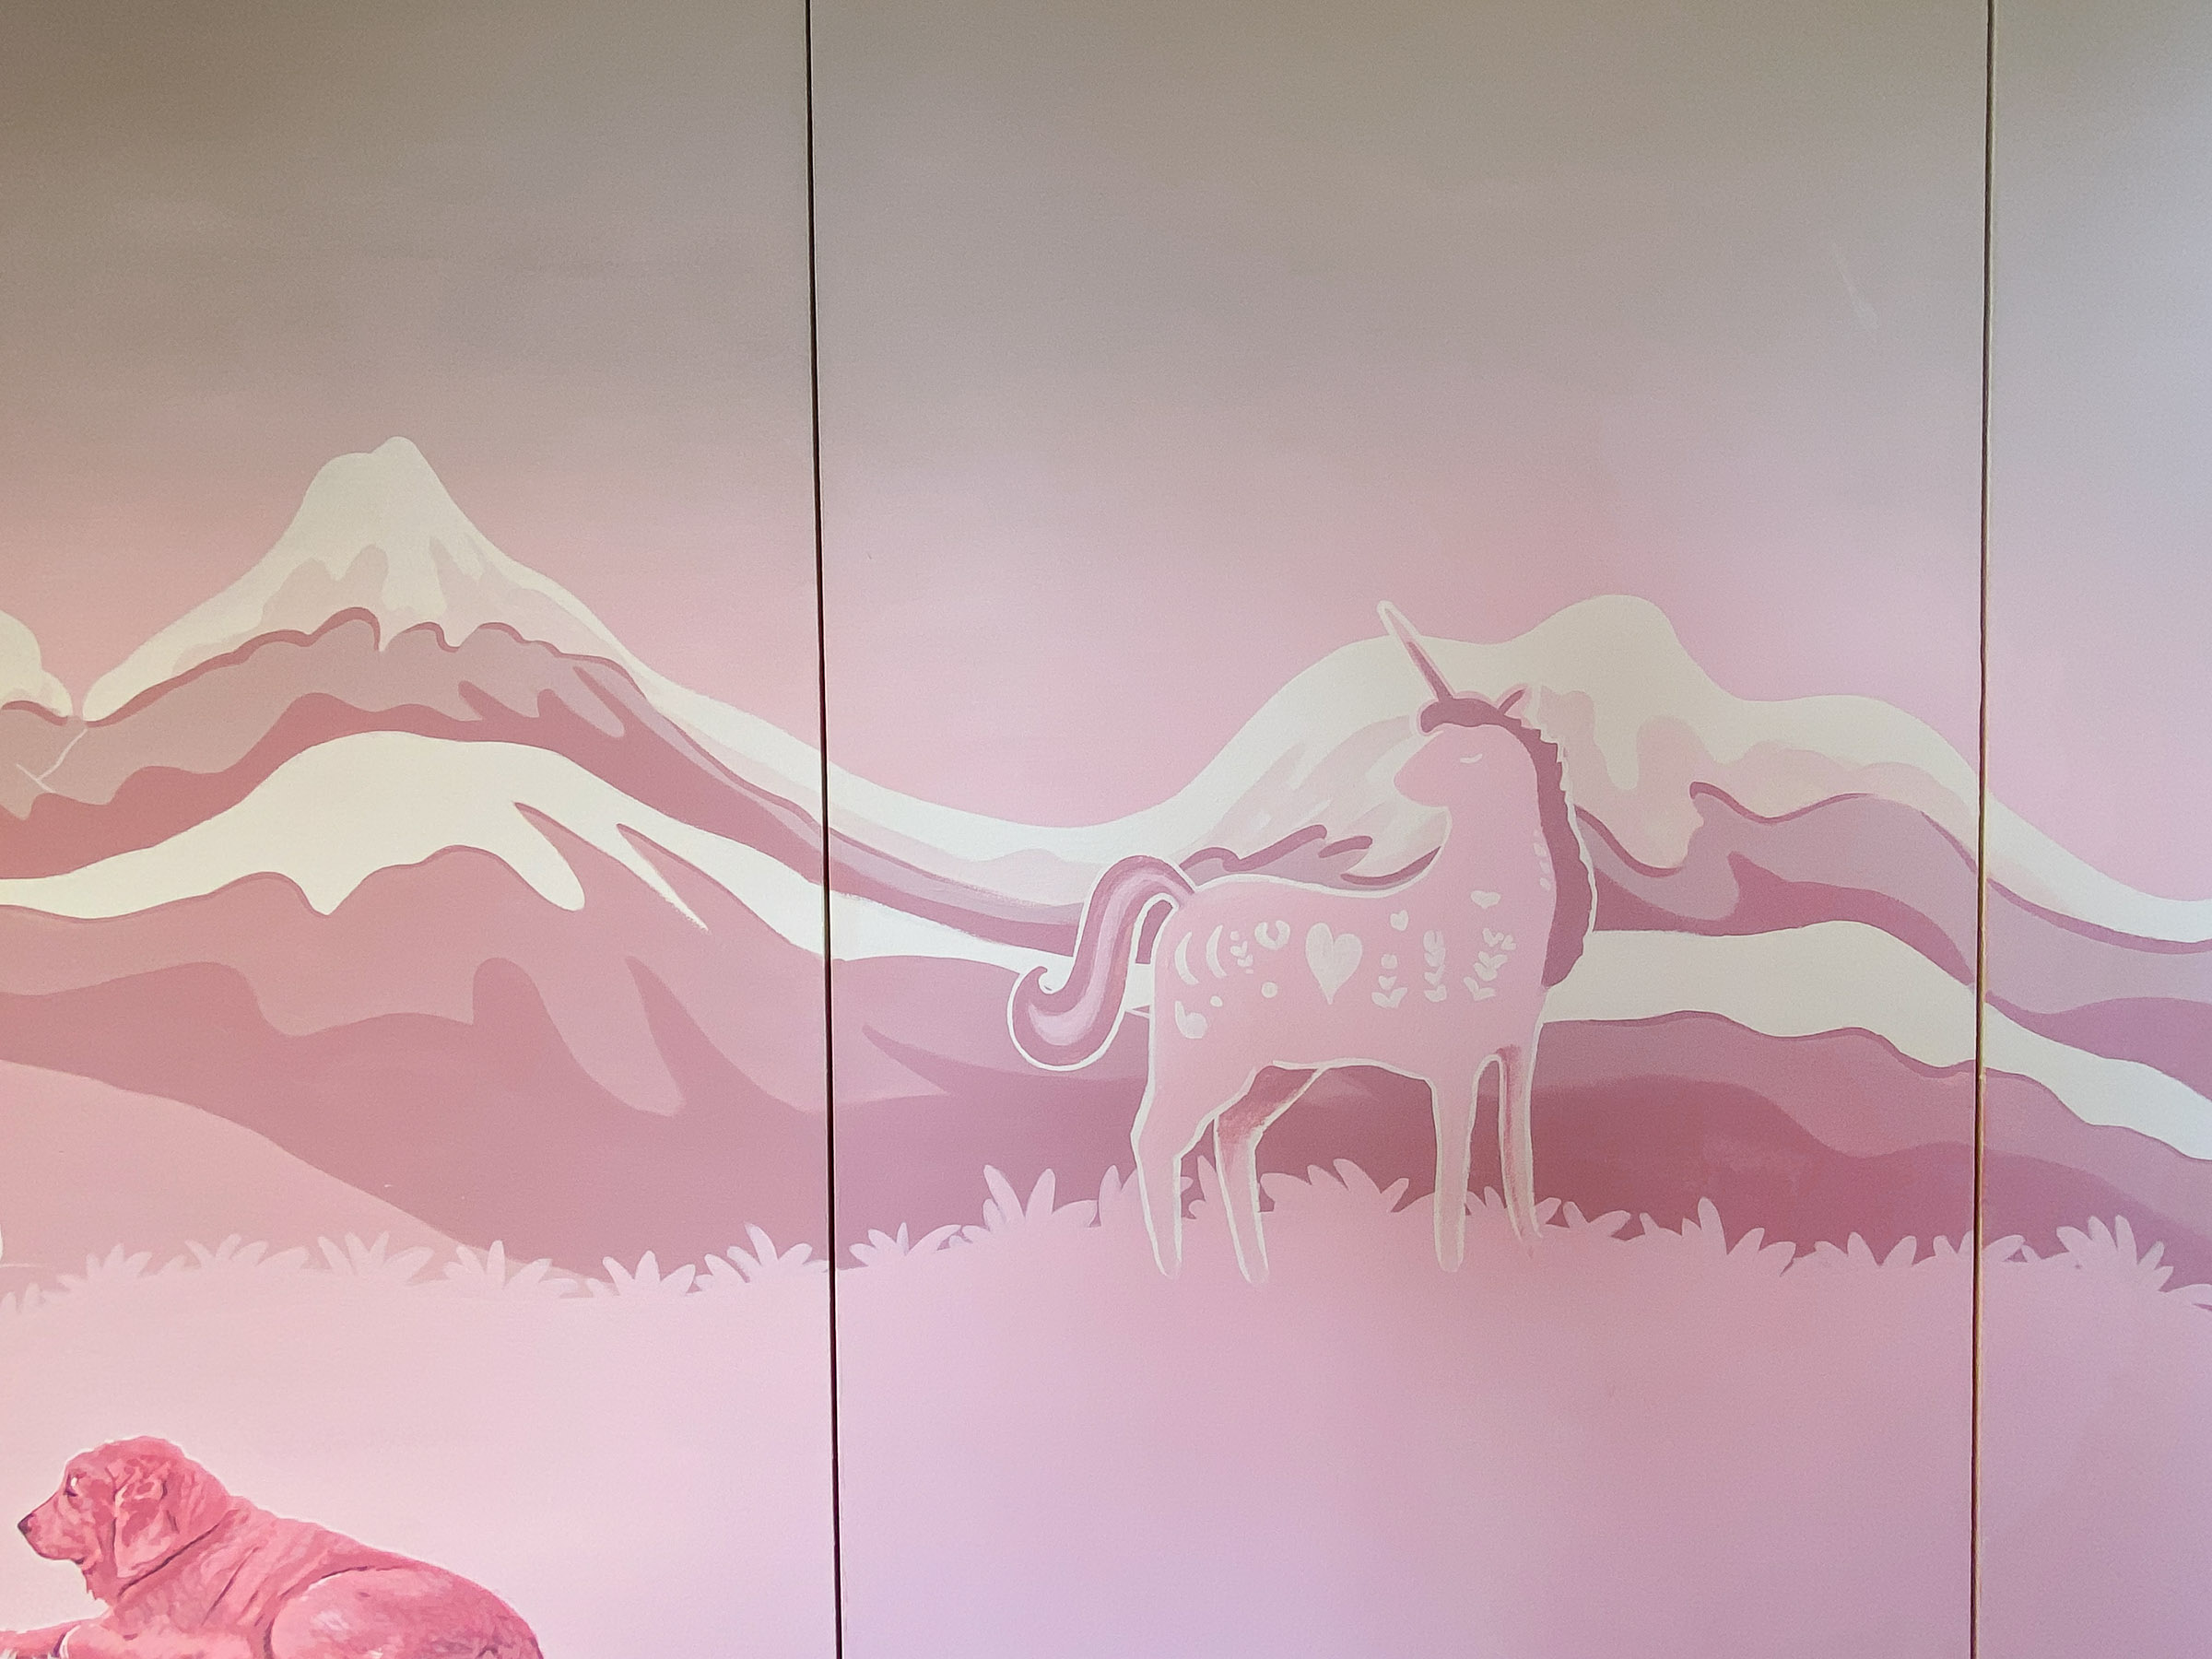 Gentle subtle unicorn on this section of the mural